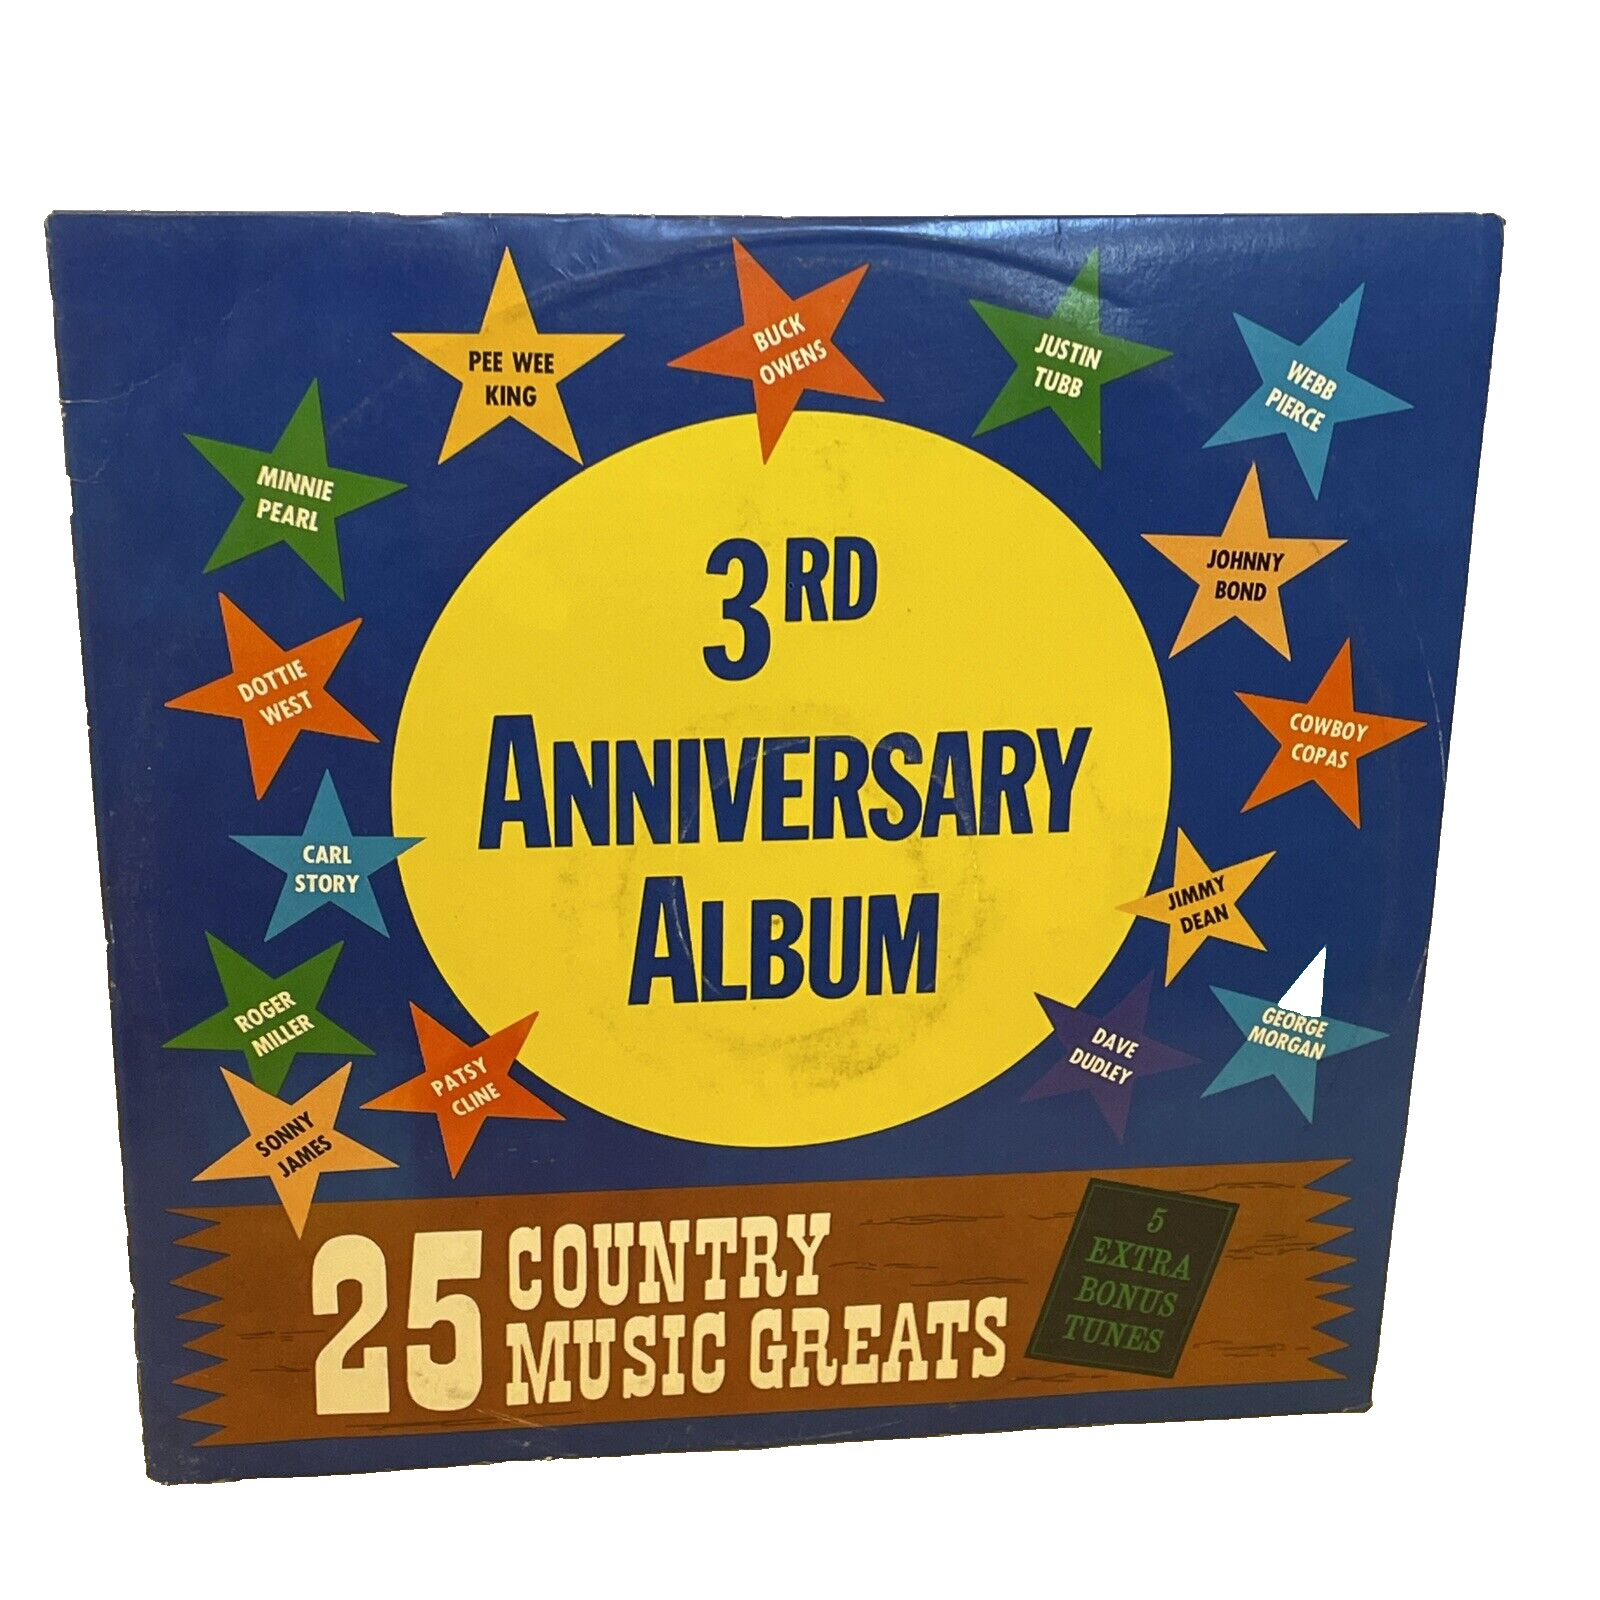 3rd Anniversary Album 25 Country Music Greats (Vinyl) Starday Records AC-1 VG+